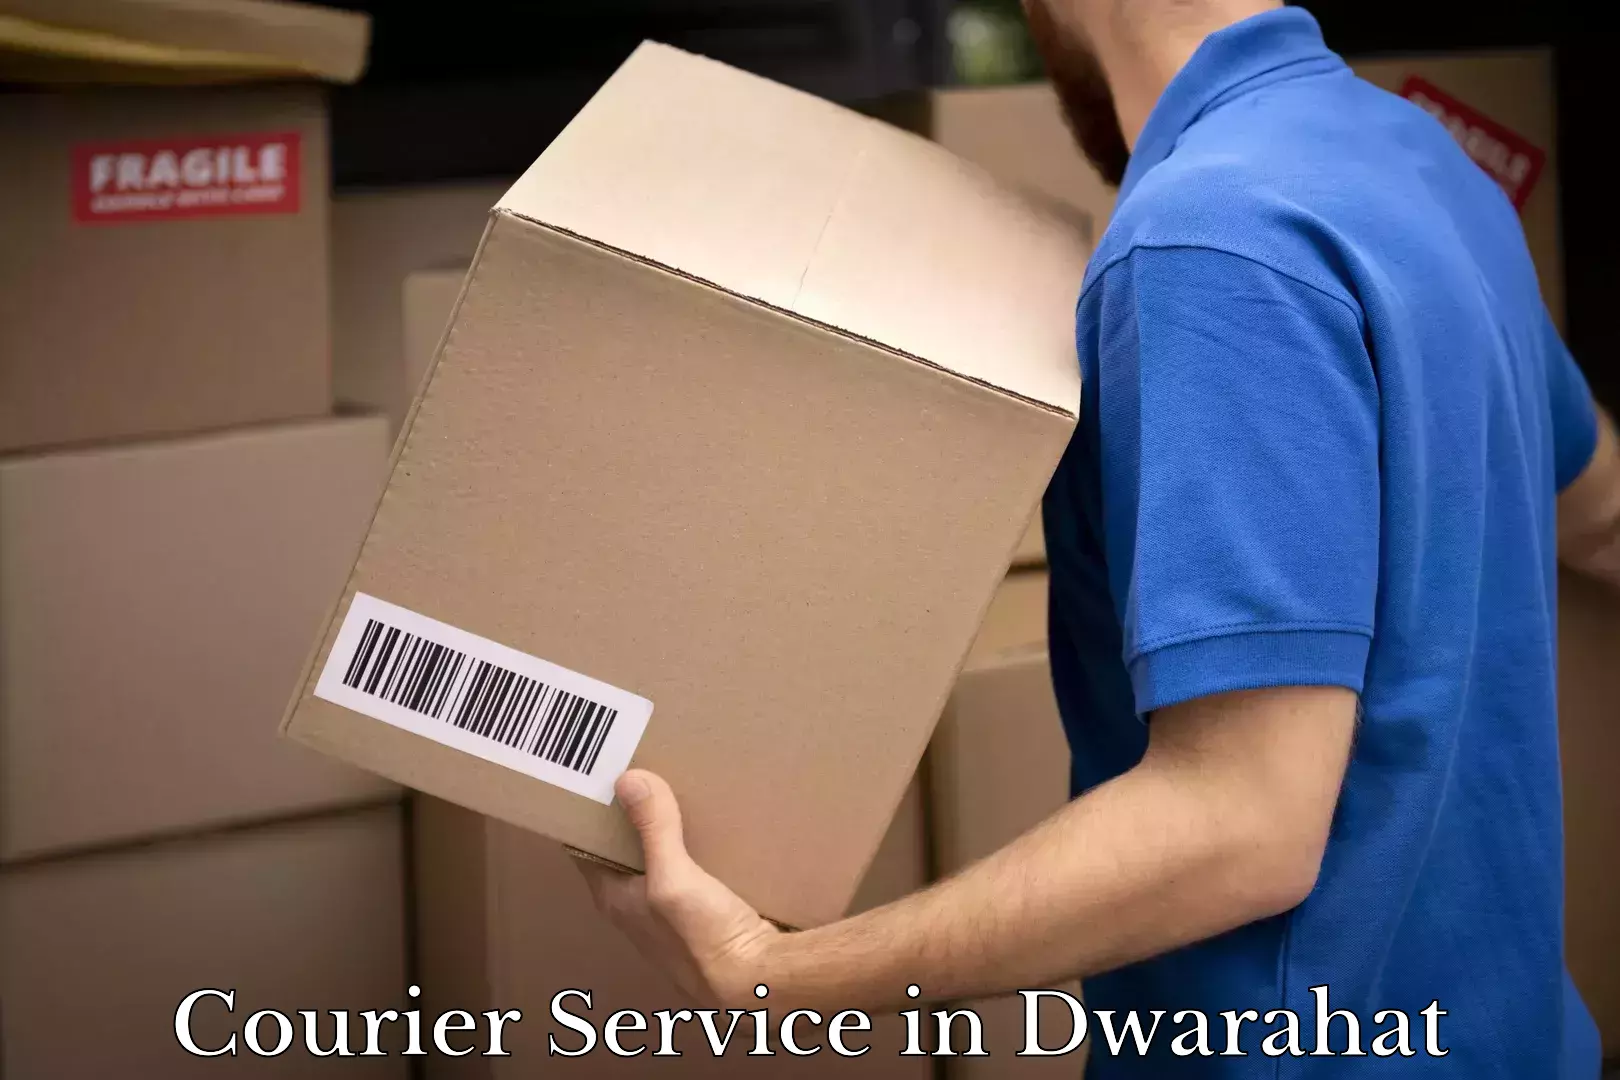 Premium delivery services in Dwarahat